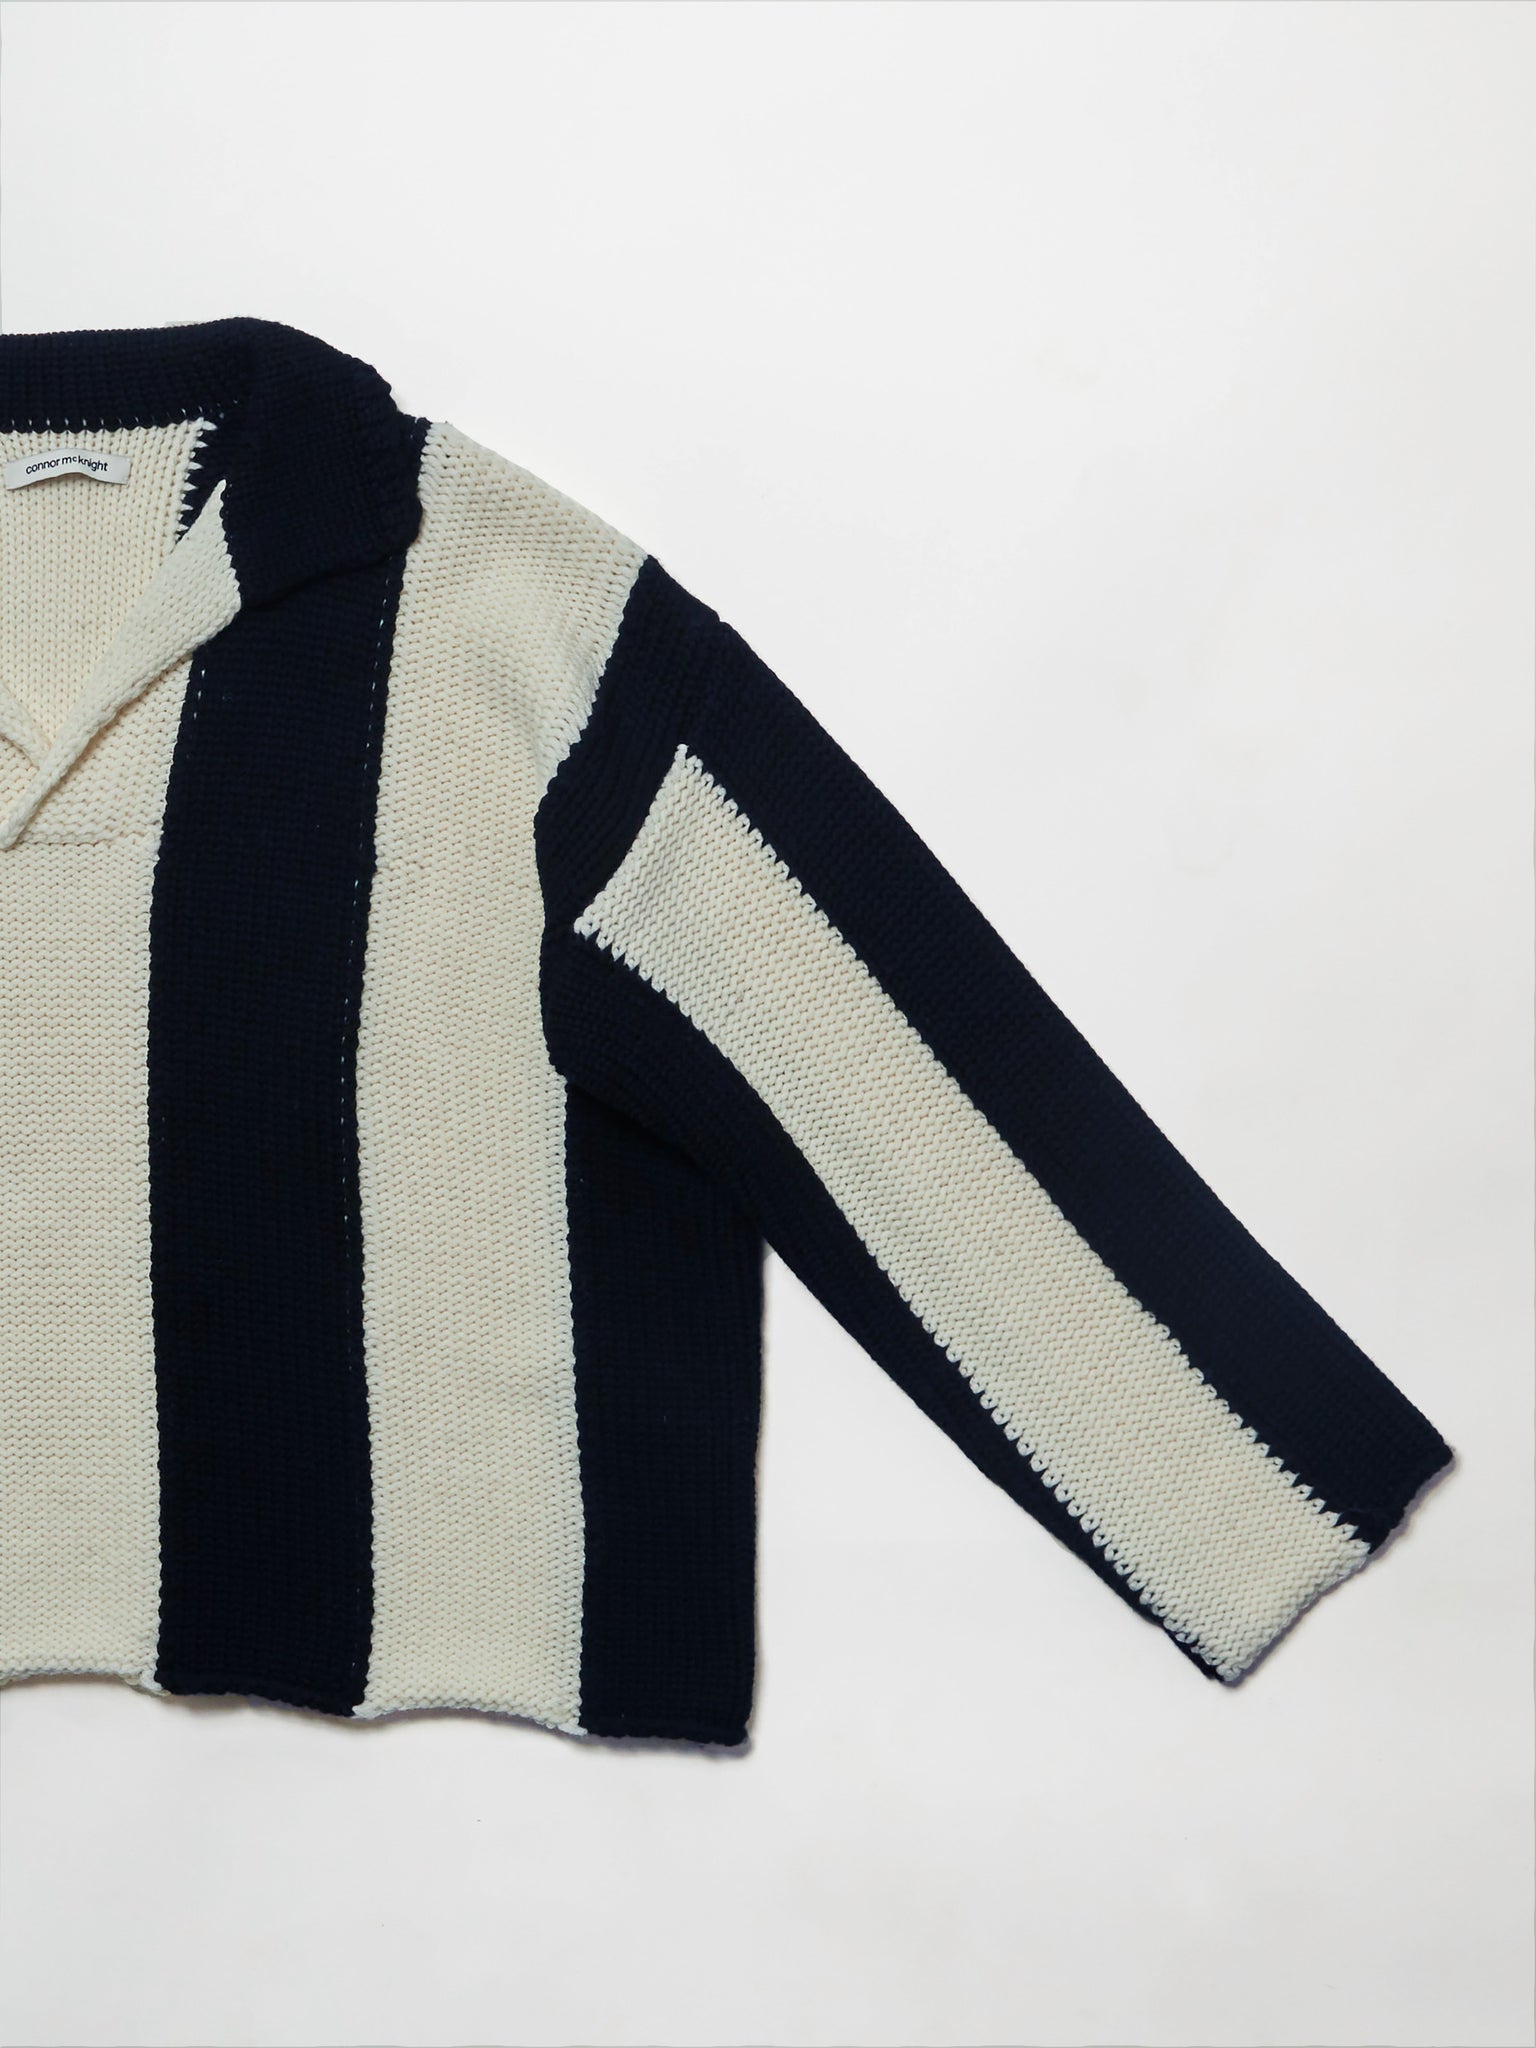 broad striped rugby sweater